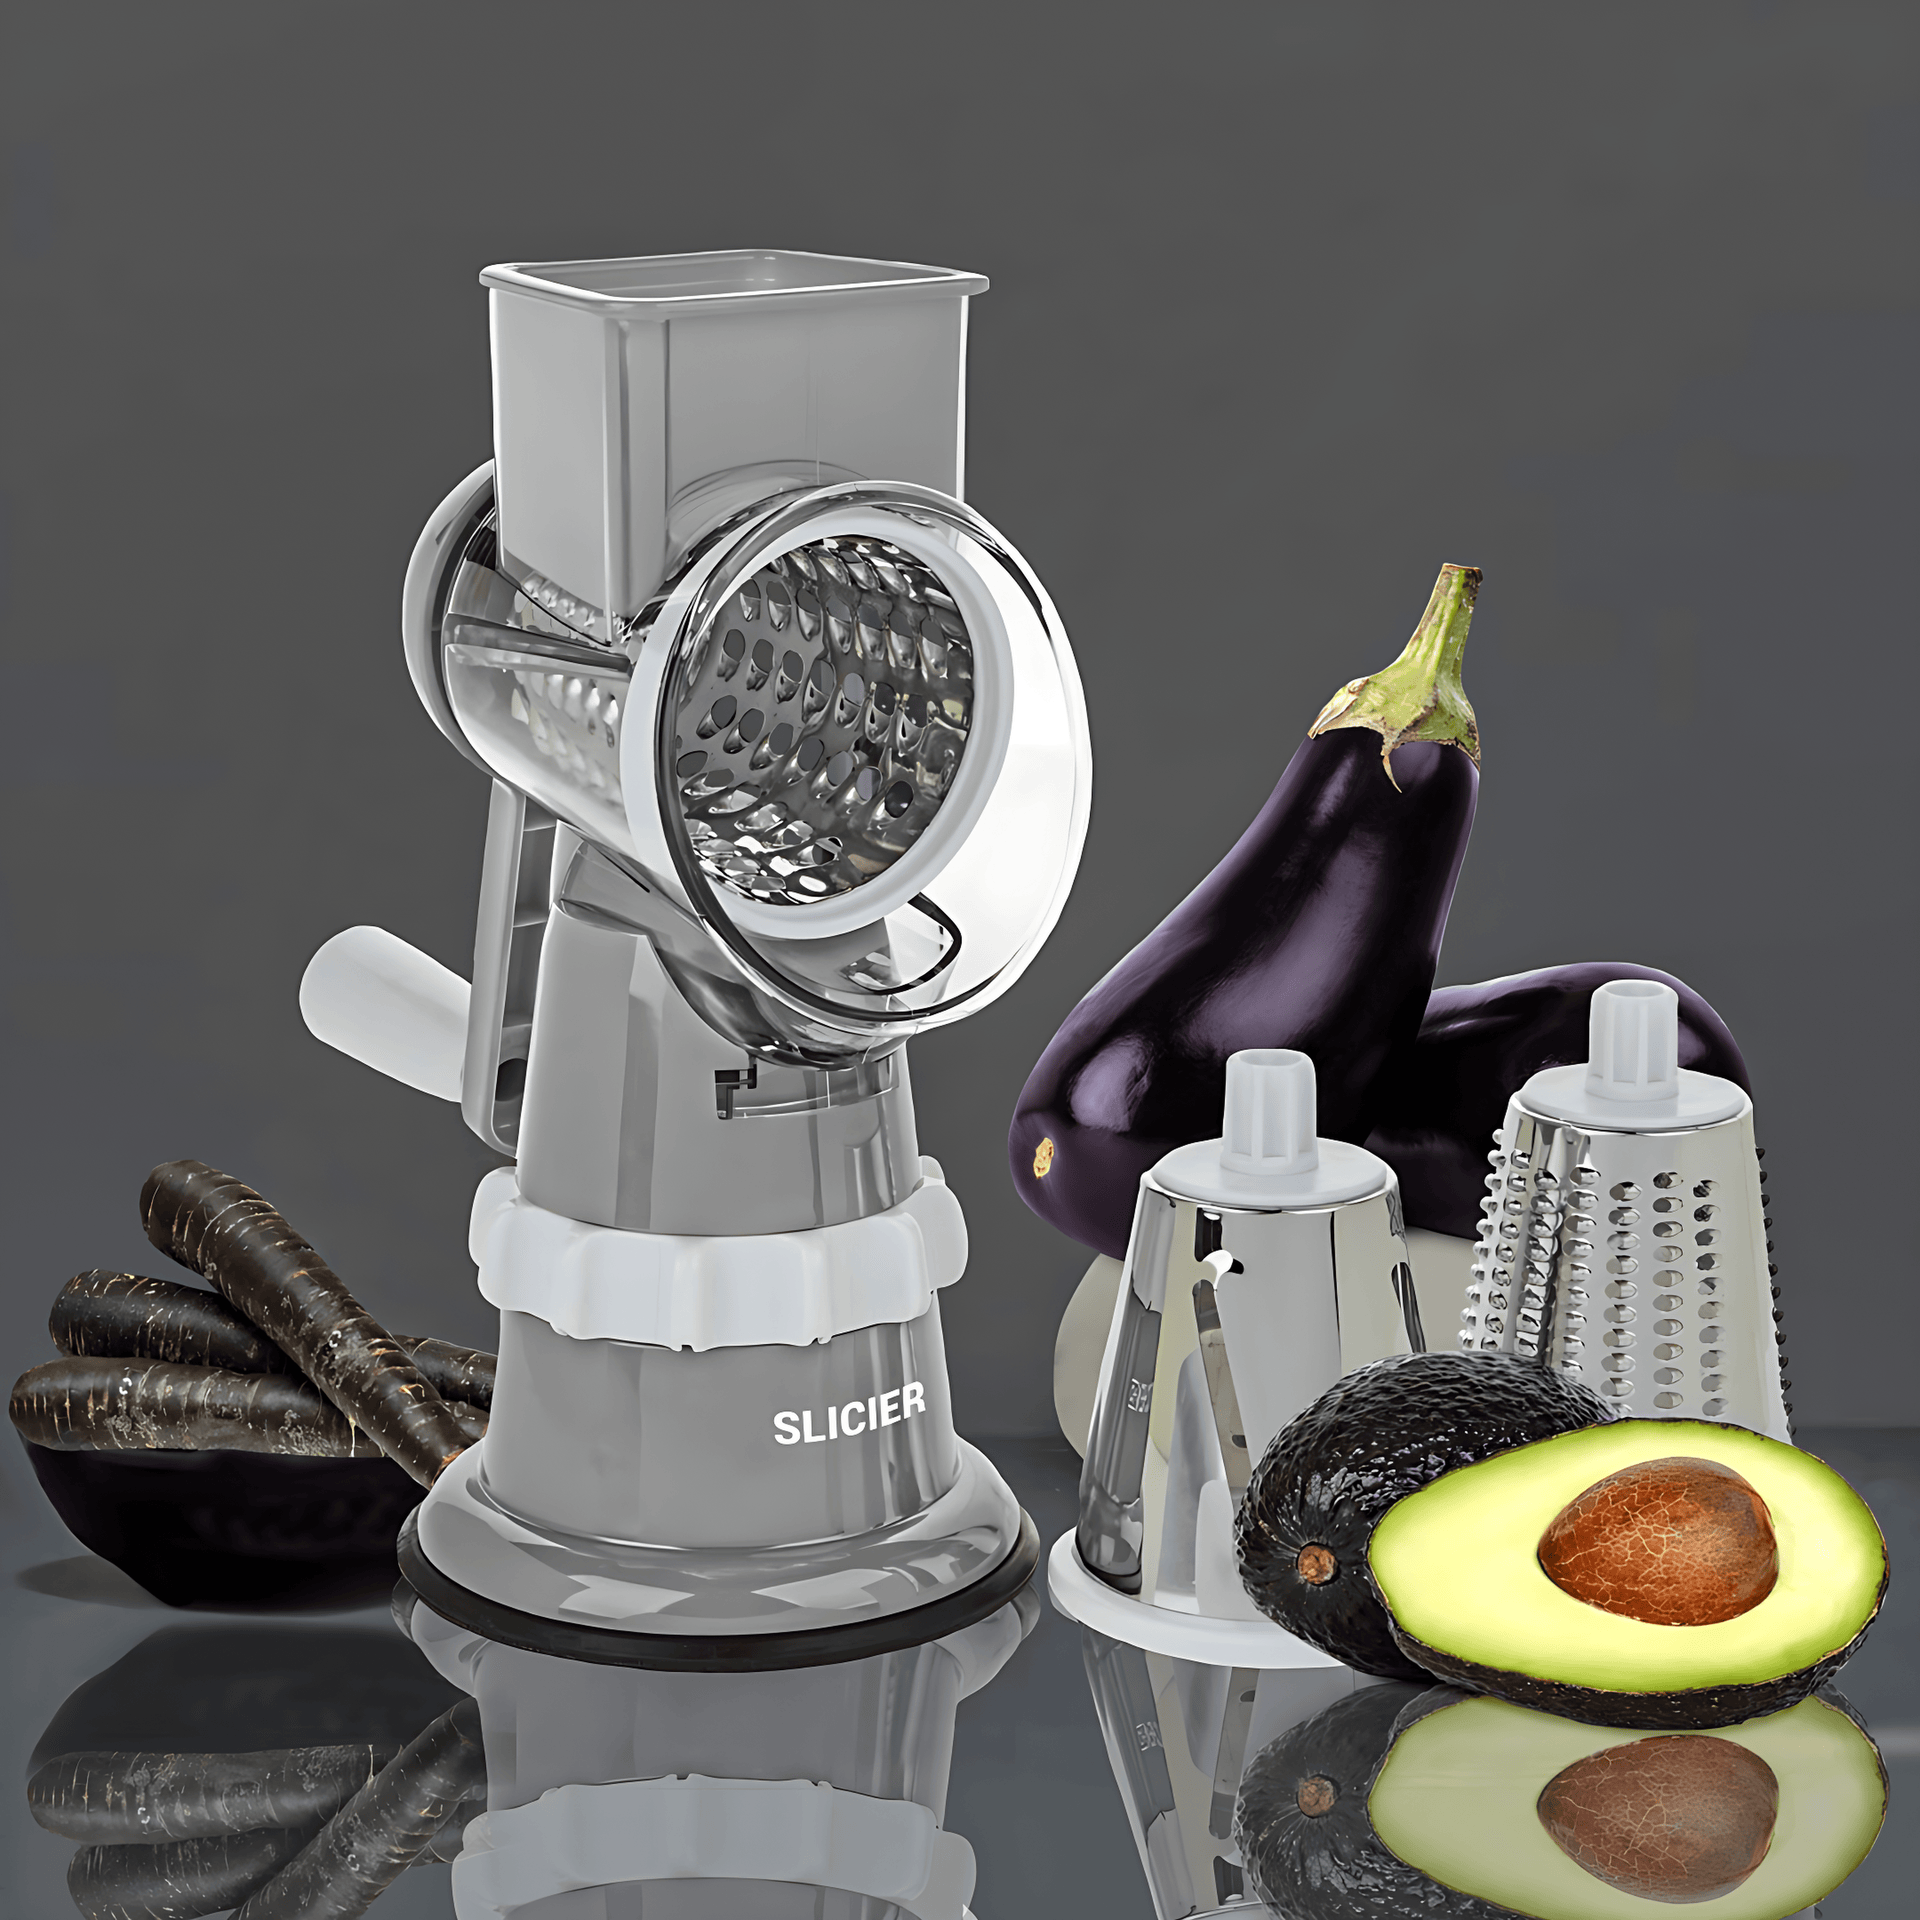 Manual Rotary Cheese Grater -Round Mandoline Slicer with 3 Interchangeable Blades -Vegetable Slicer Nuts Grinder Cheese Shredder with Free 3-in-1